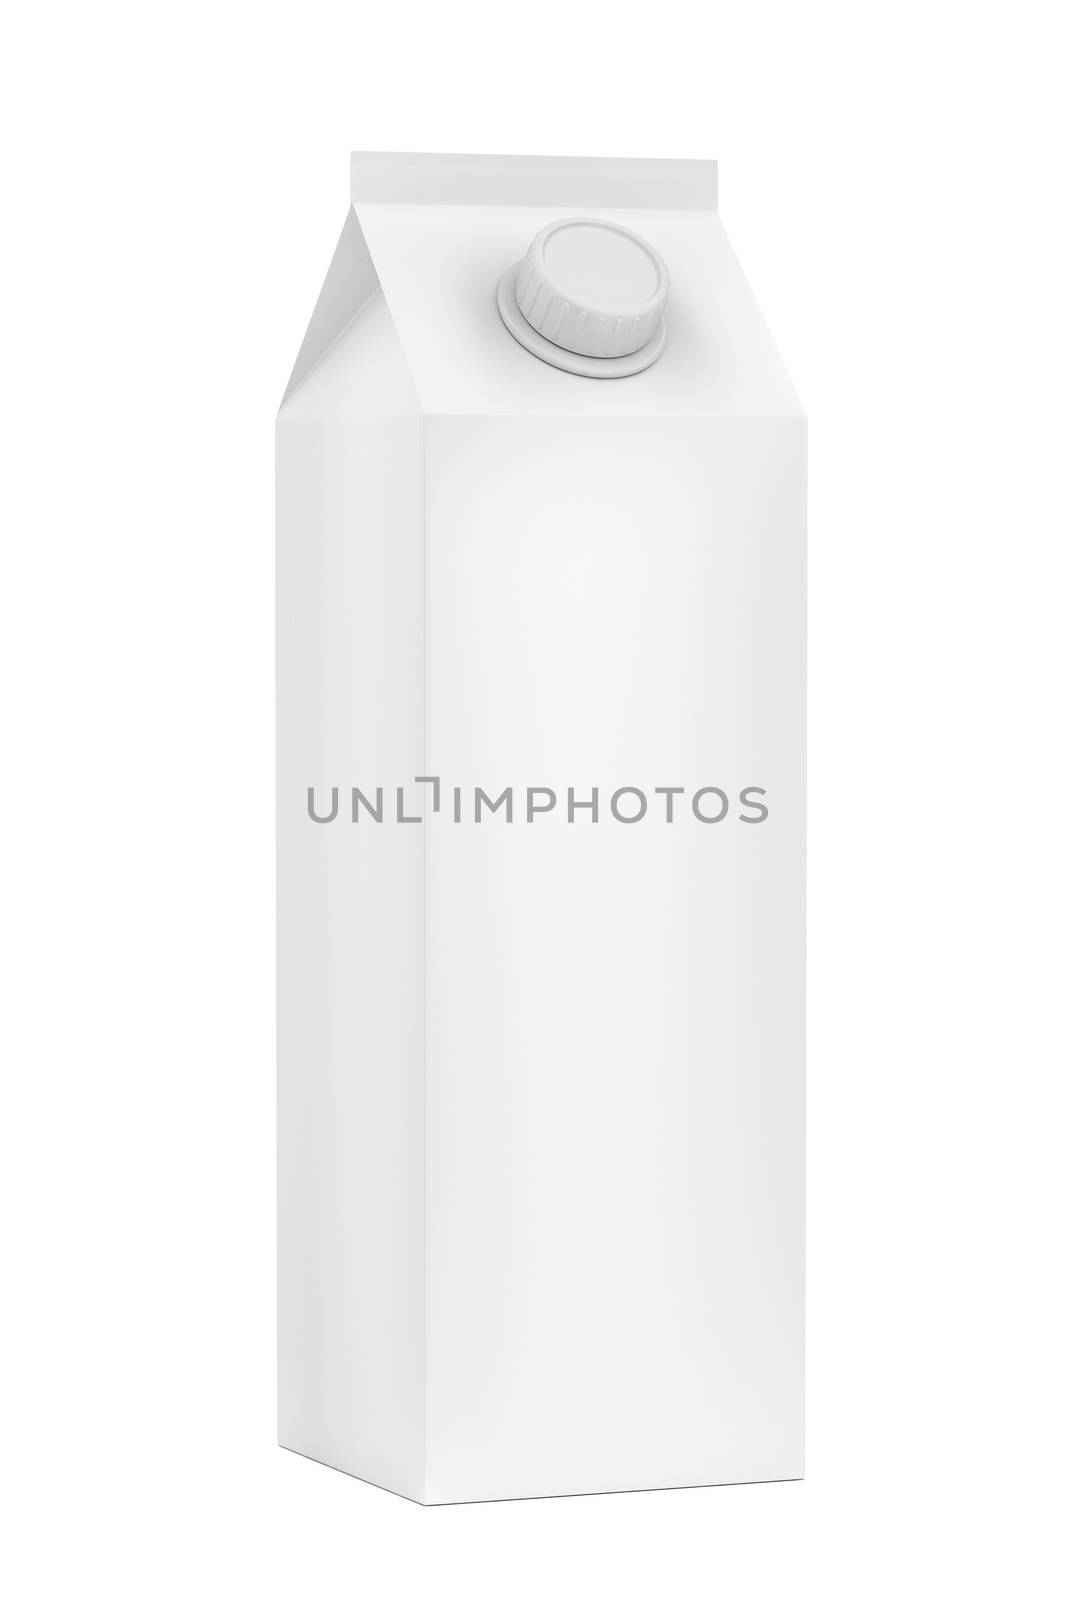 White blank packaging for milk, juice or other beverages